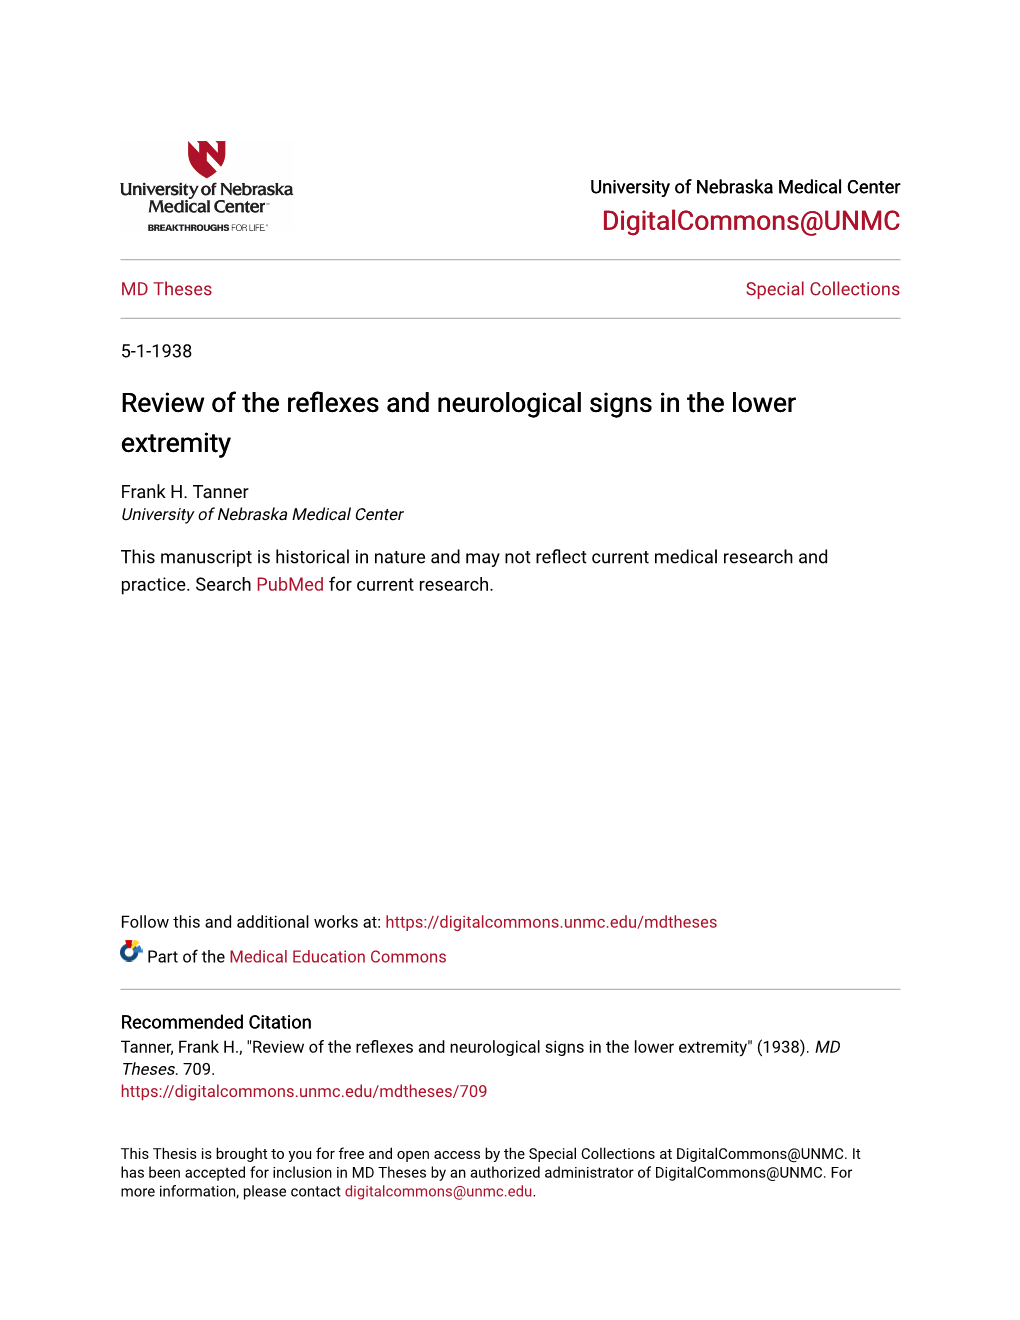 Review of the Reflexes and Neurological Signs in the Lower Extremity